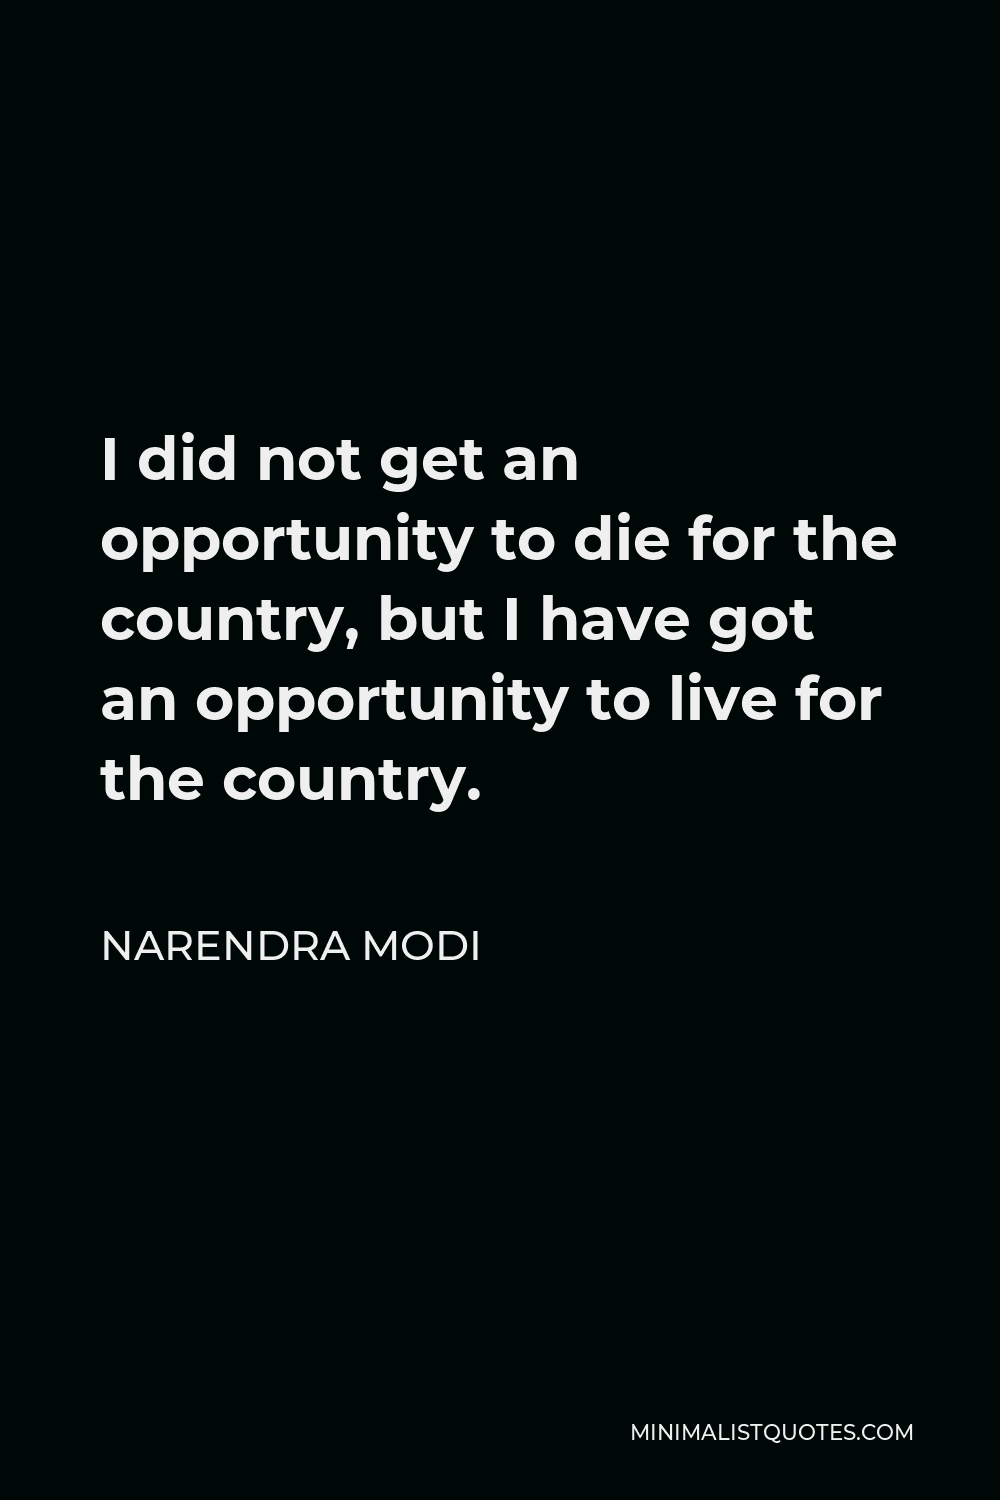 Narendra Modi Quote - I did not get an opportunity to die for the country, but I have got an opportunity to live for the country.